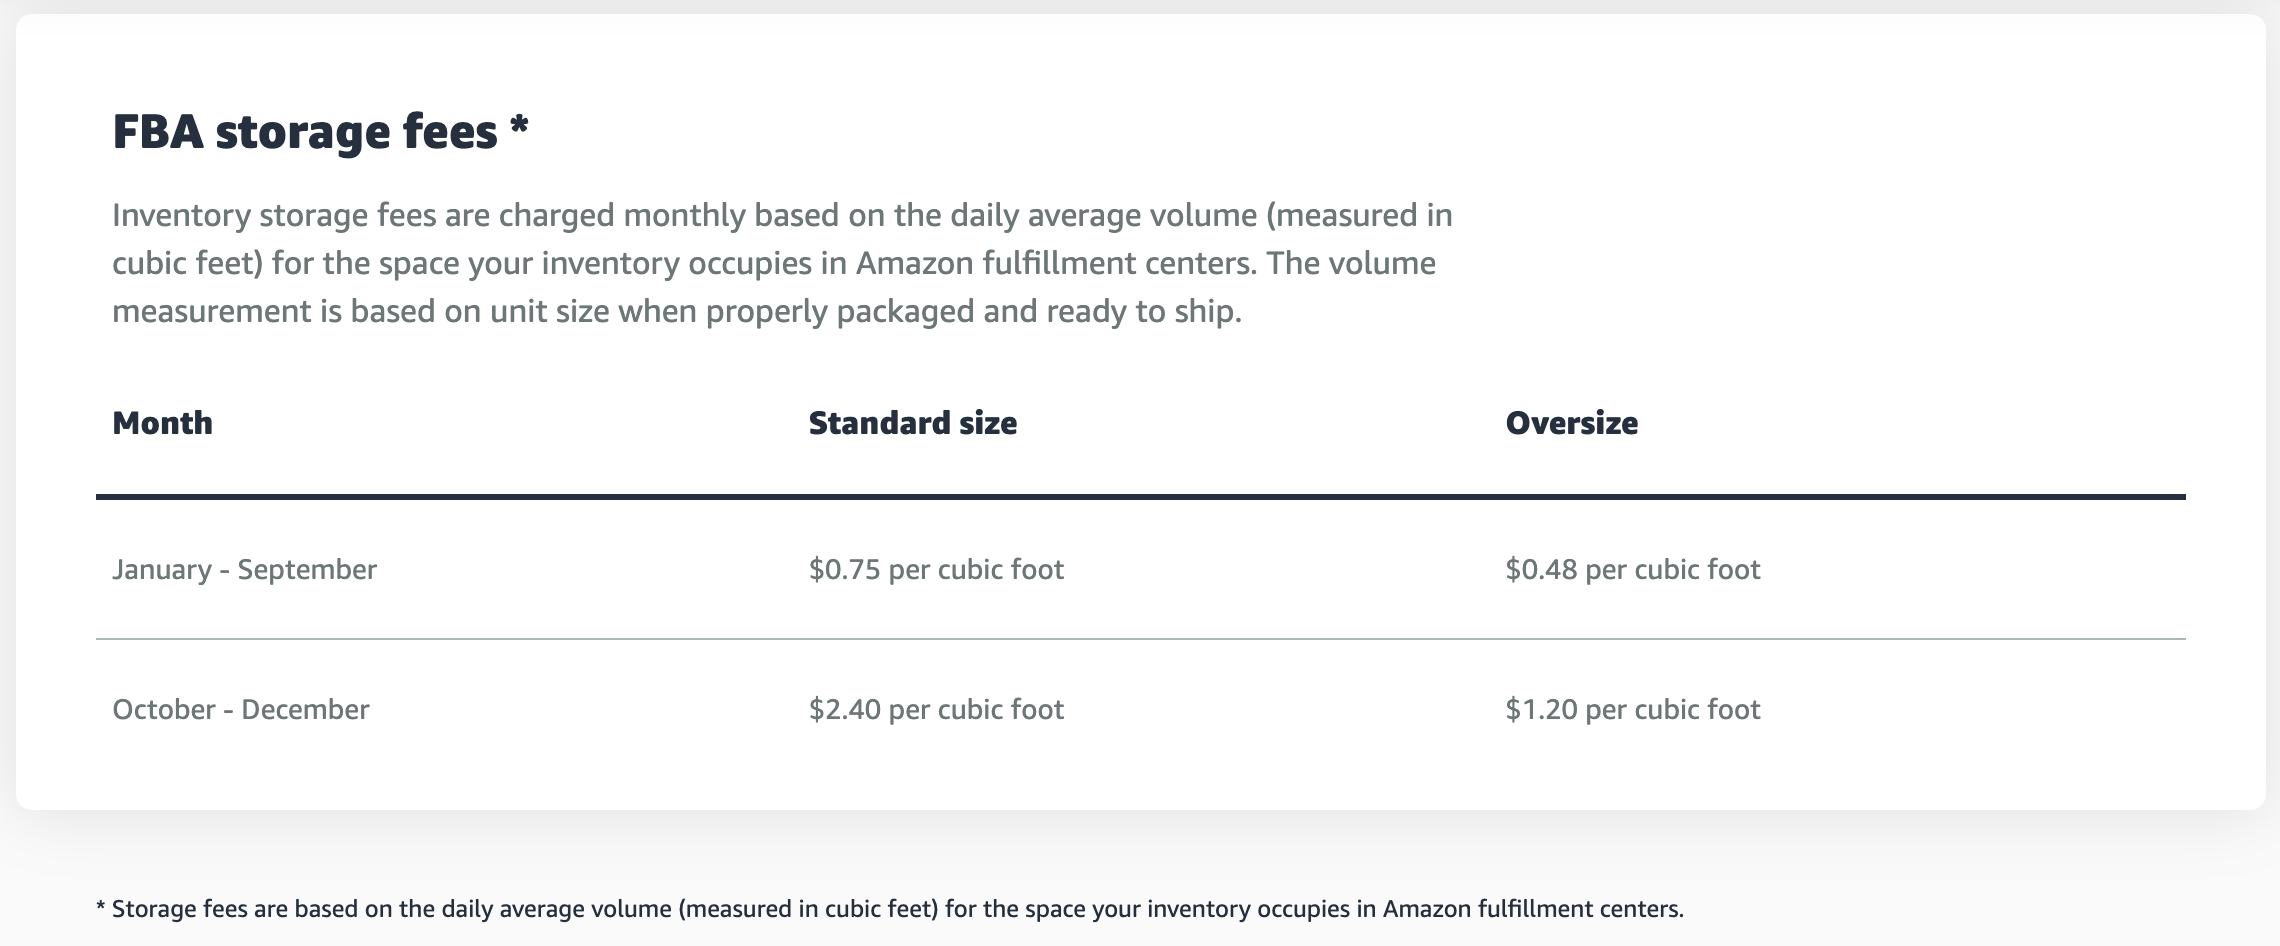 Screenshot of Amazon storage fees which differ between January-September and October-December